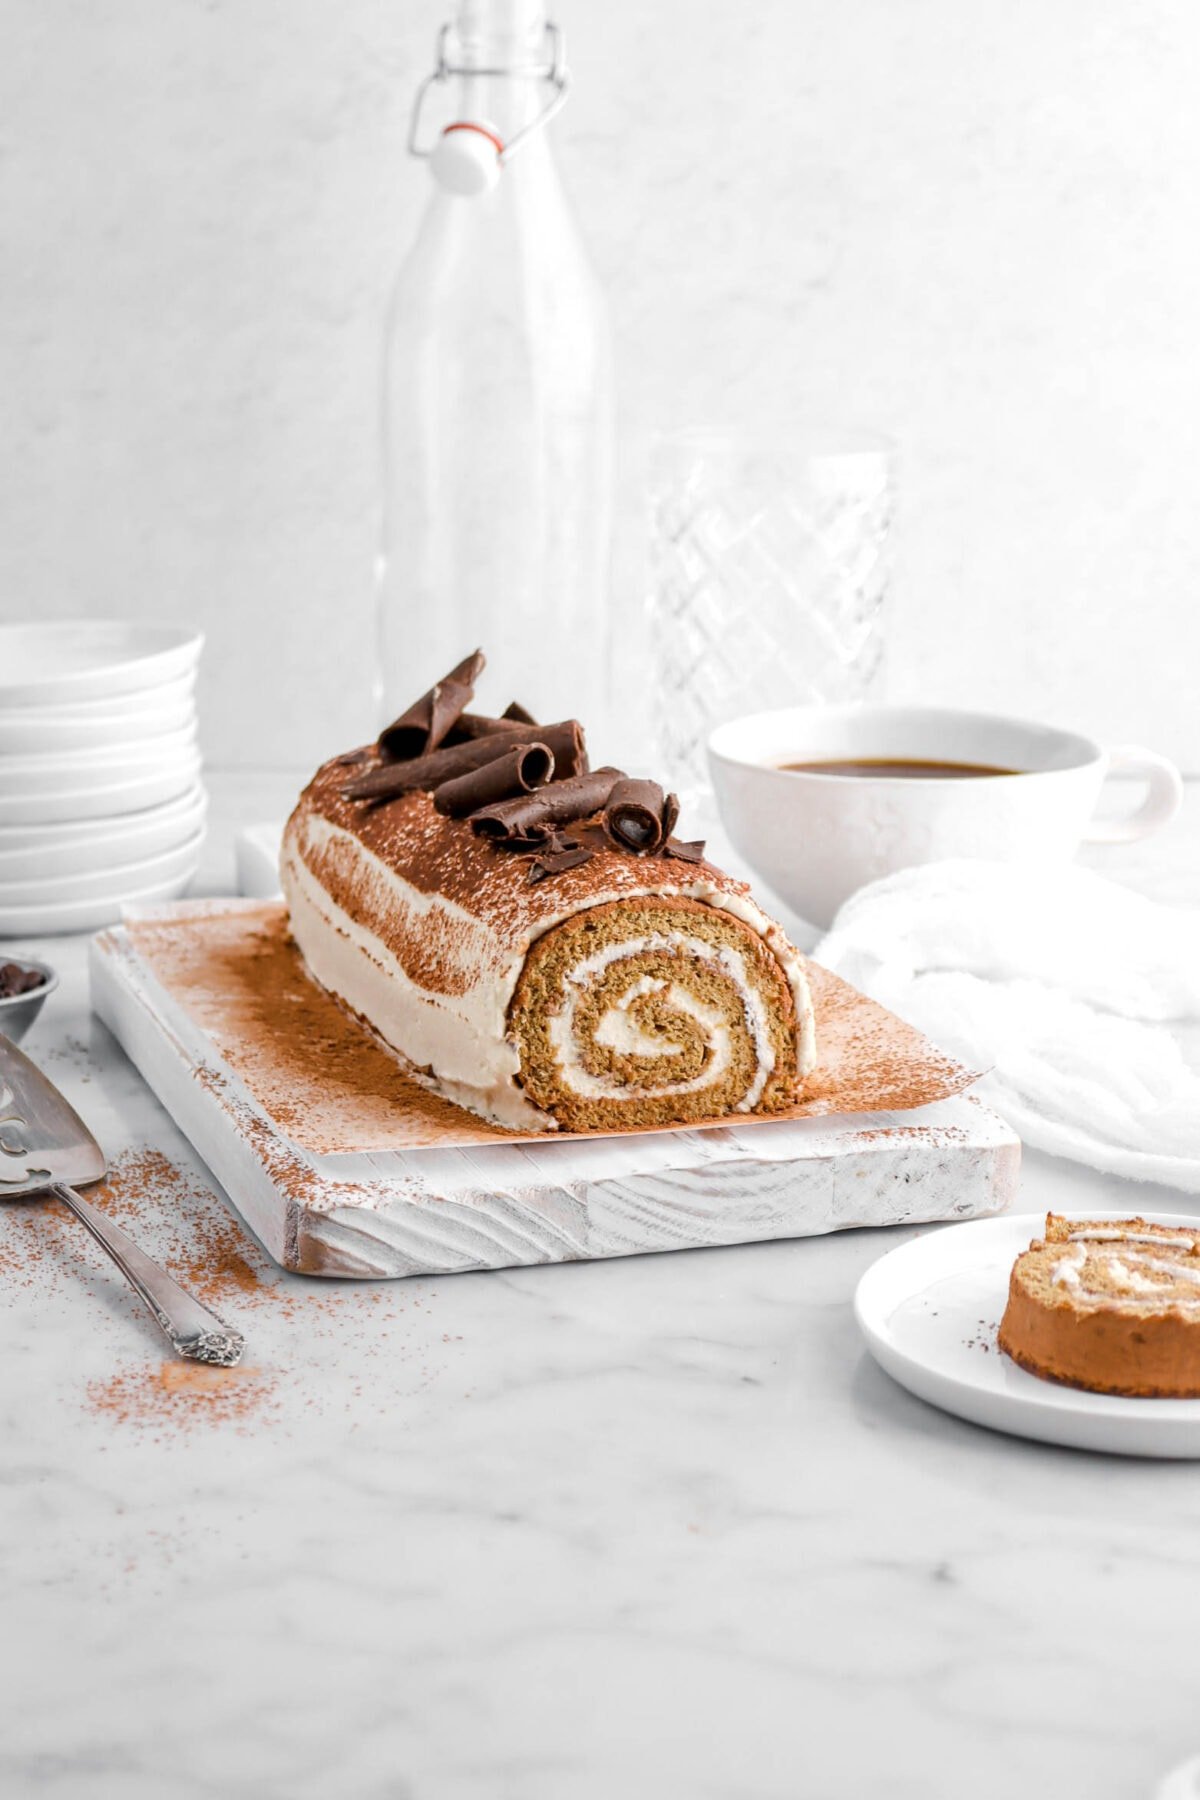 front shot of tiramisu cake roll on white wood board with cocoa powder and chocolate curls on top, a white plate with a slice of cake roll in front, a coffee mug behind with a white cheesecloth and two empty glasses.